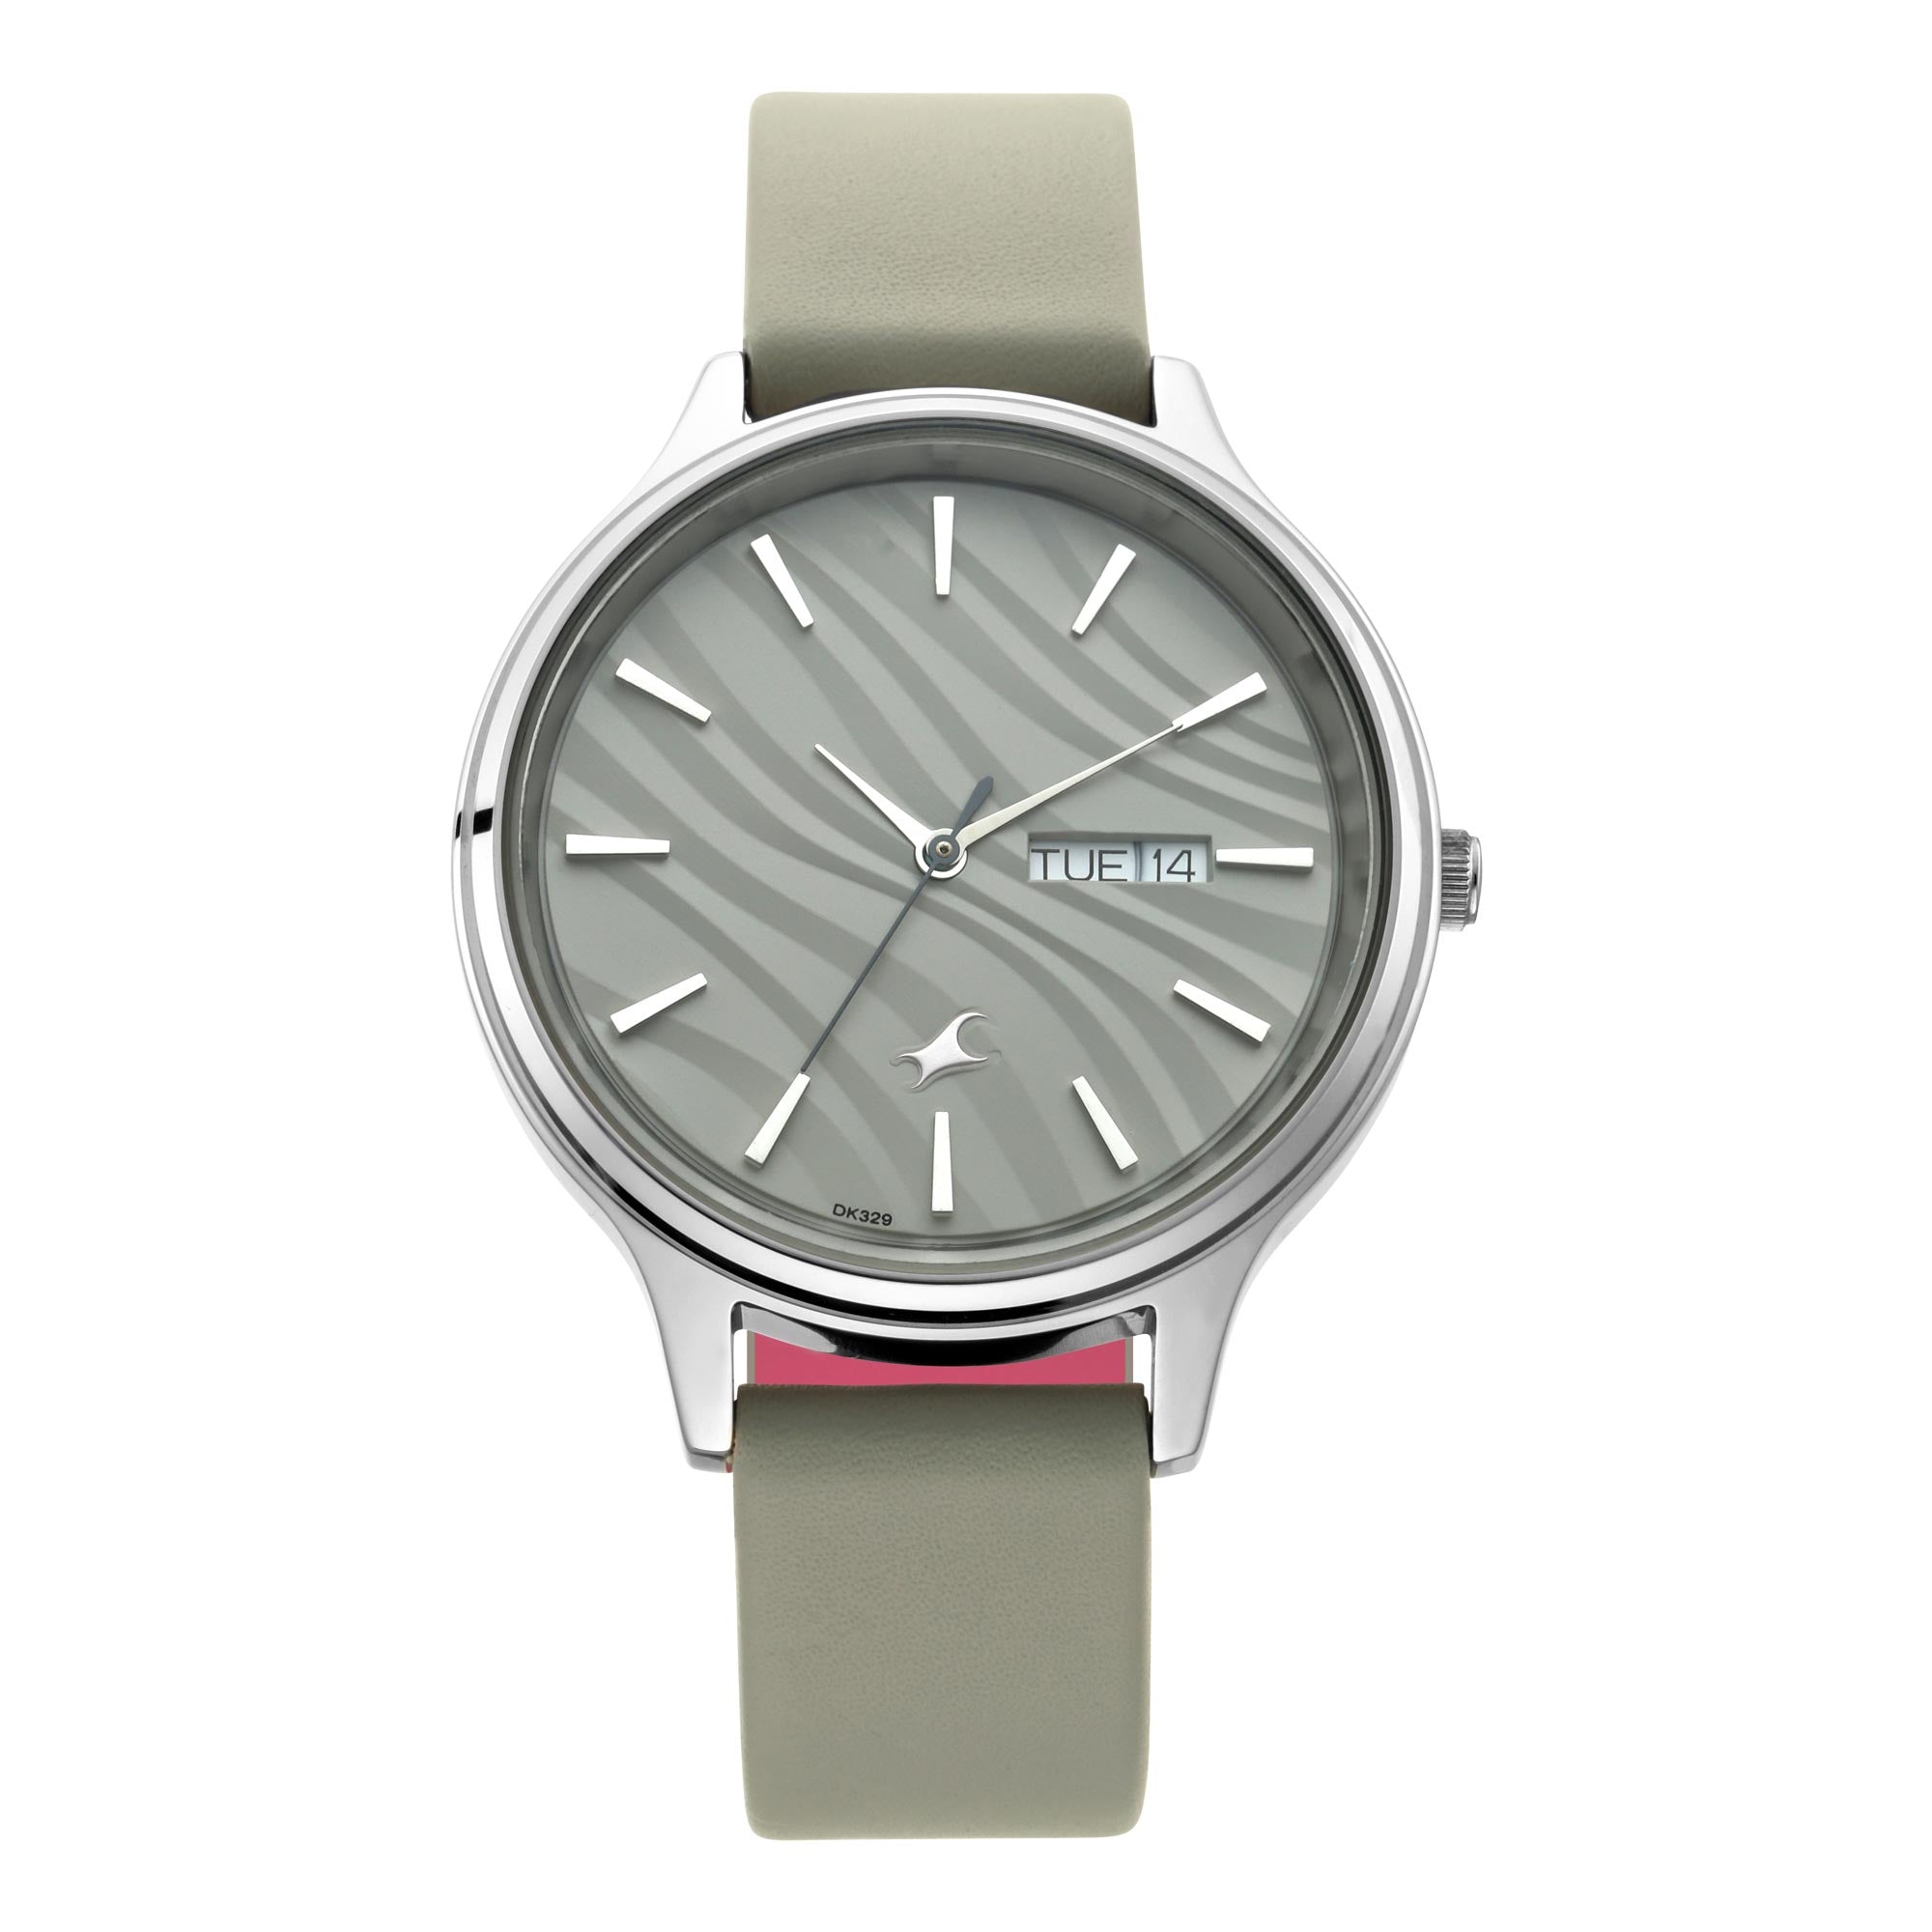 Fastrack Fastrack Ruffles Quartz Analog with Day and Date Grey Dial Leather Strap Watch for Girls